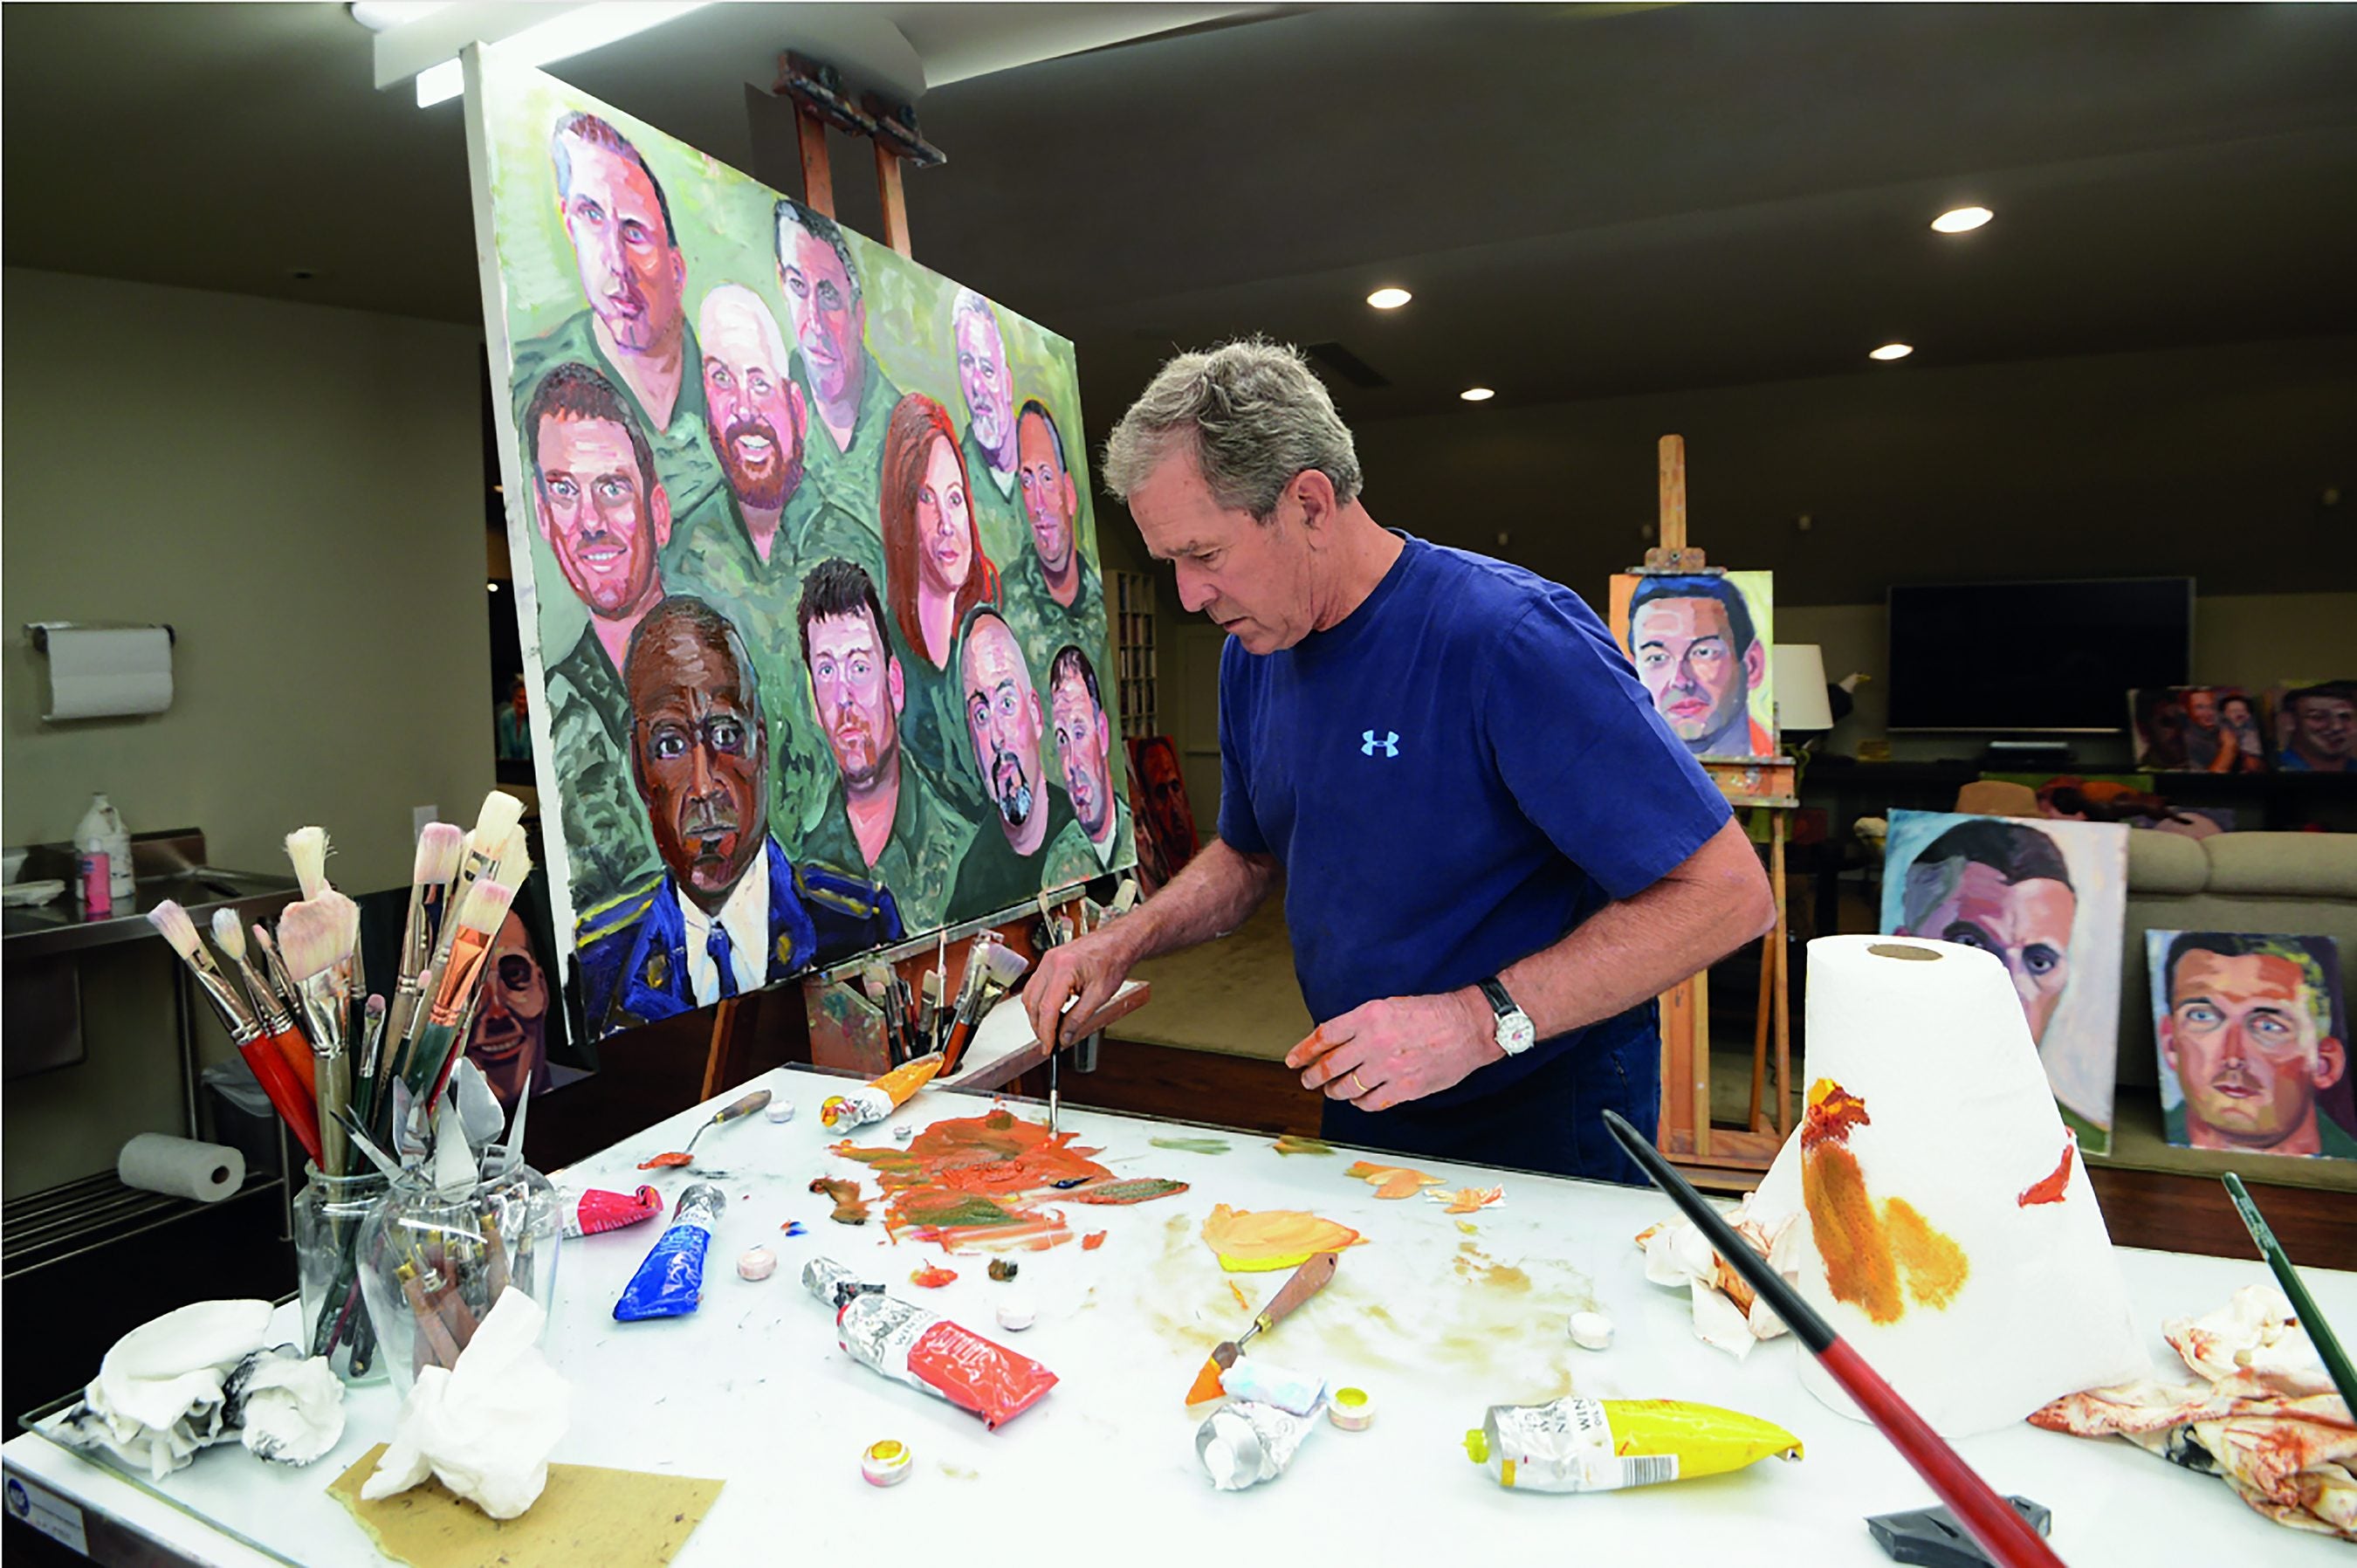 The Walt Disney Company announced it will host “Portraits of Courage: A Commander’s Tribute to America’s Warriors”, a special exhibit from the George W. Bush Institute, for a 12-month exhibition inside The American Adventure pavilion at EPCOT located at Walt Disney World Resort starting with a grand opening on June 9, 2024